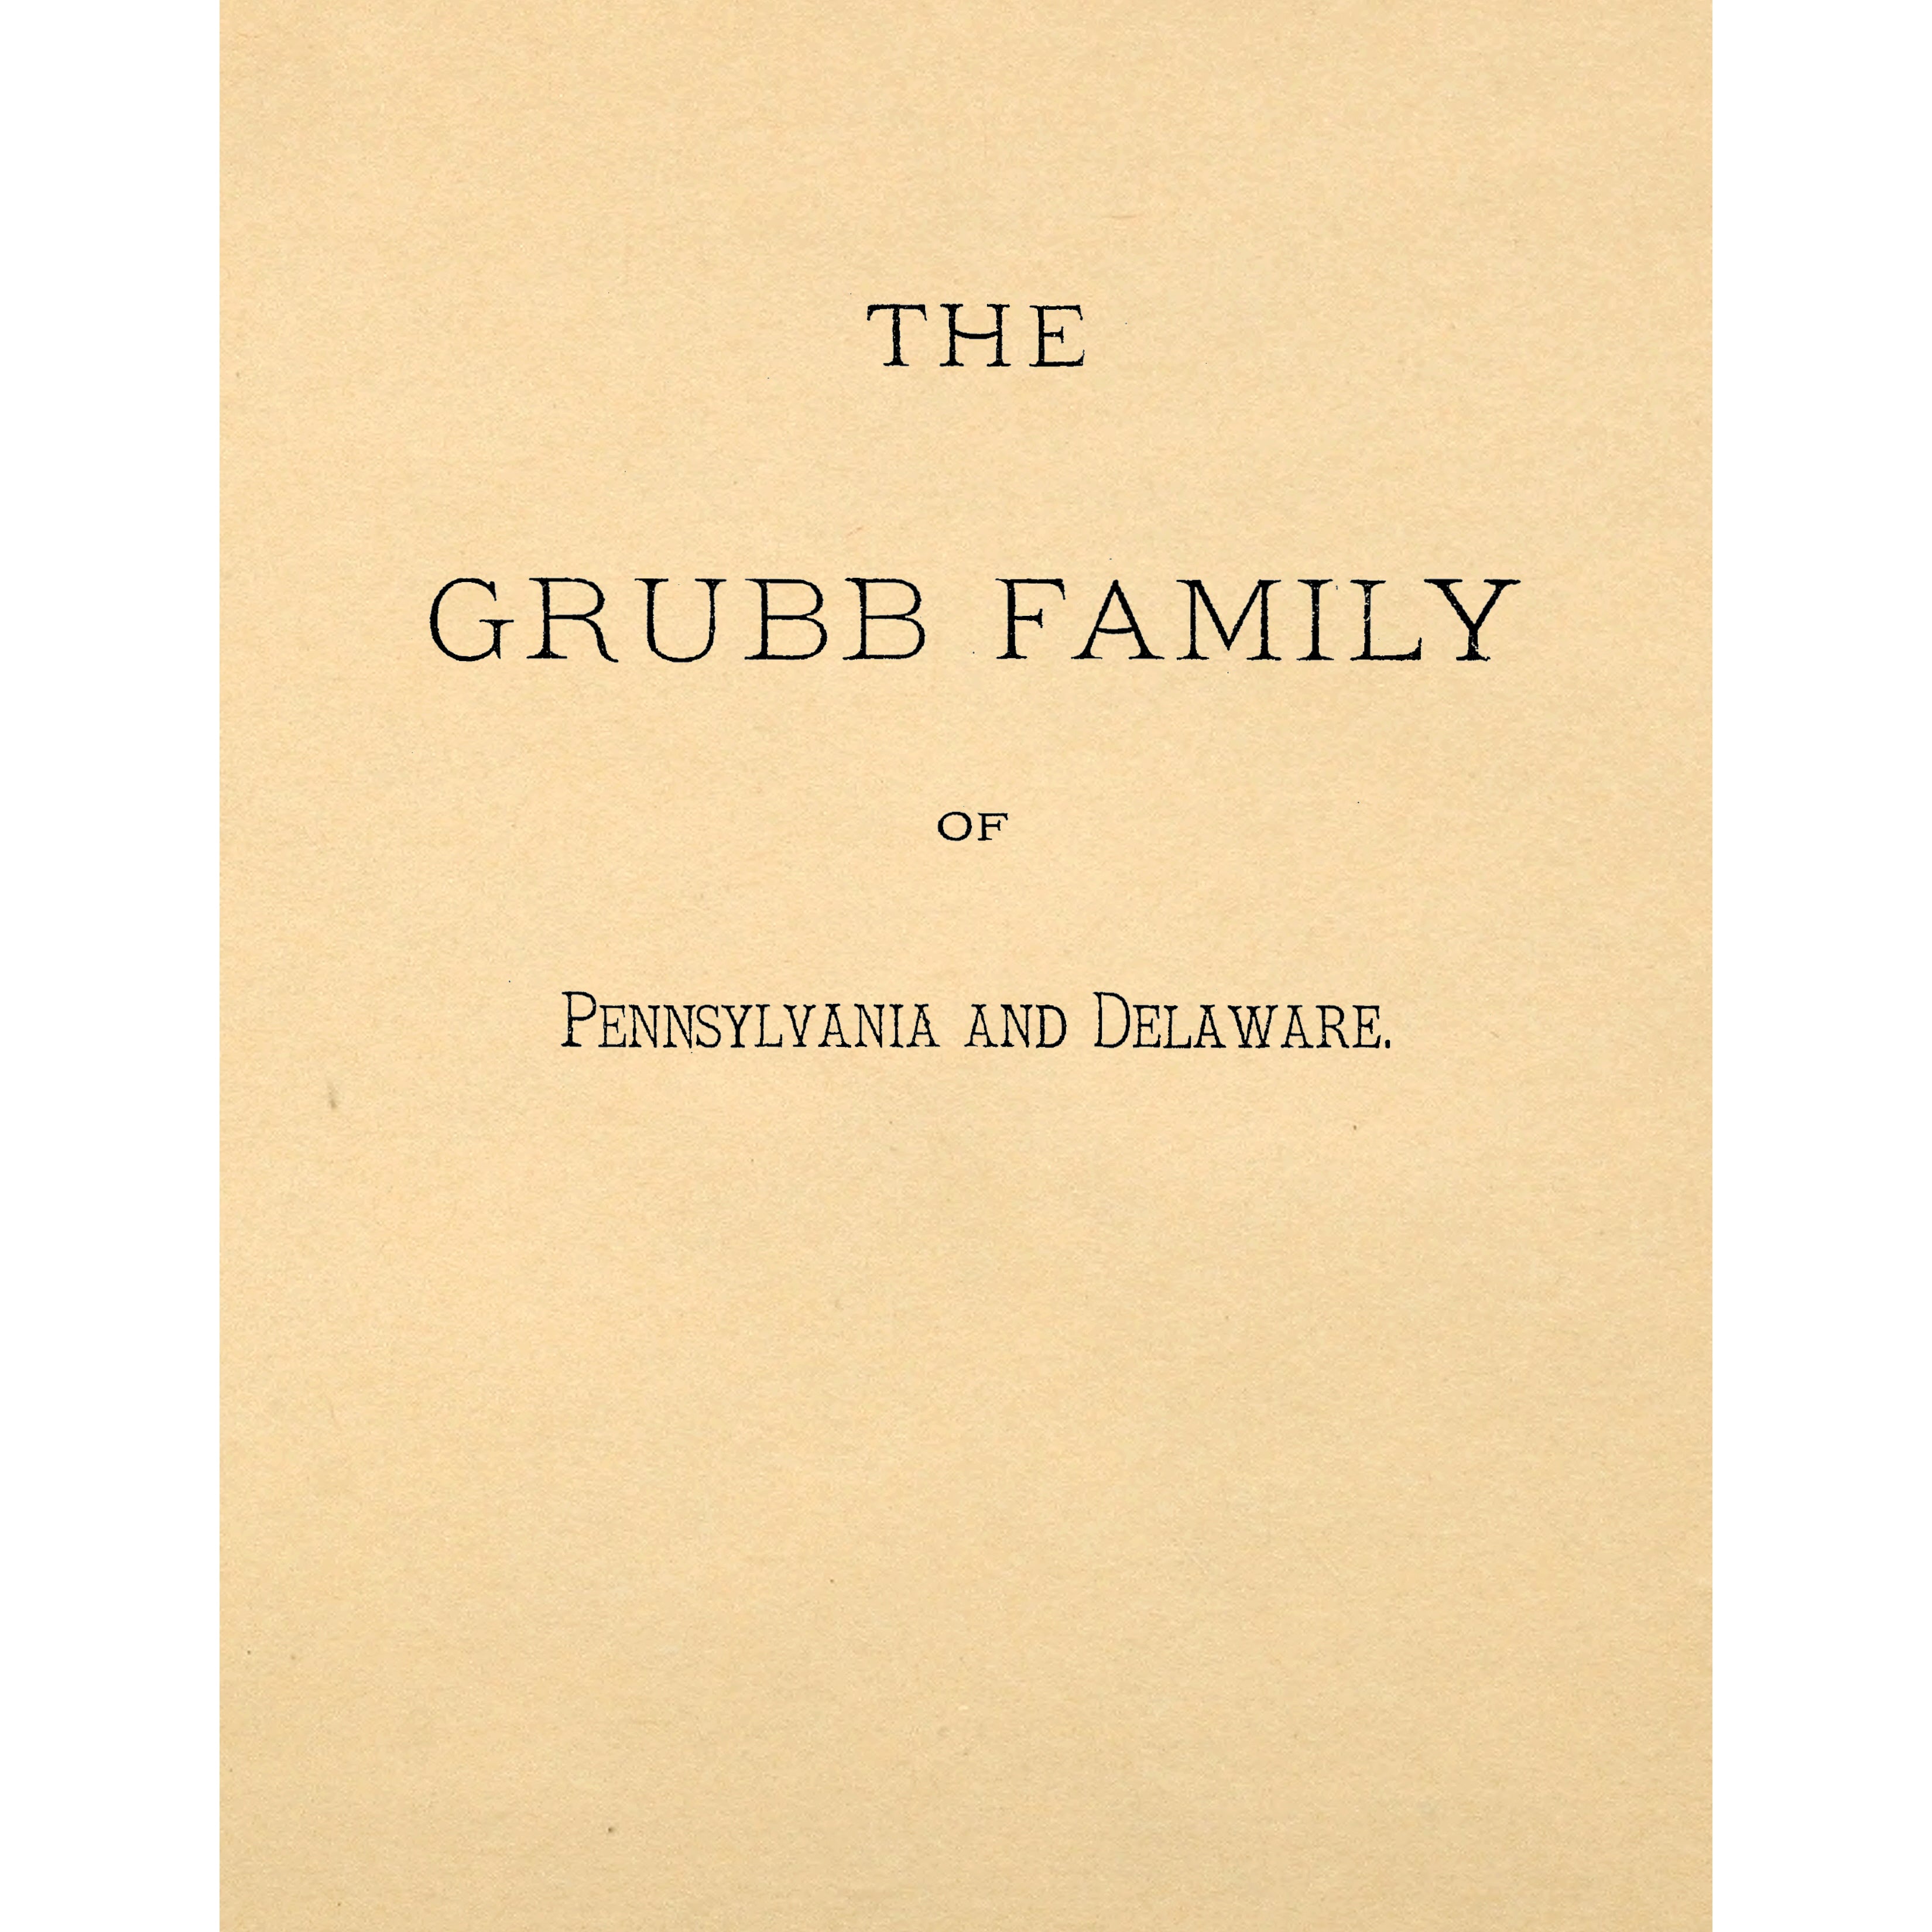 The Grubb Family of Pennsylvania and Delaware